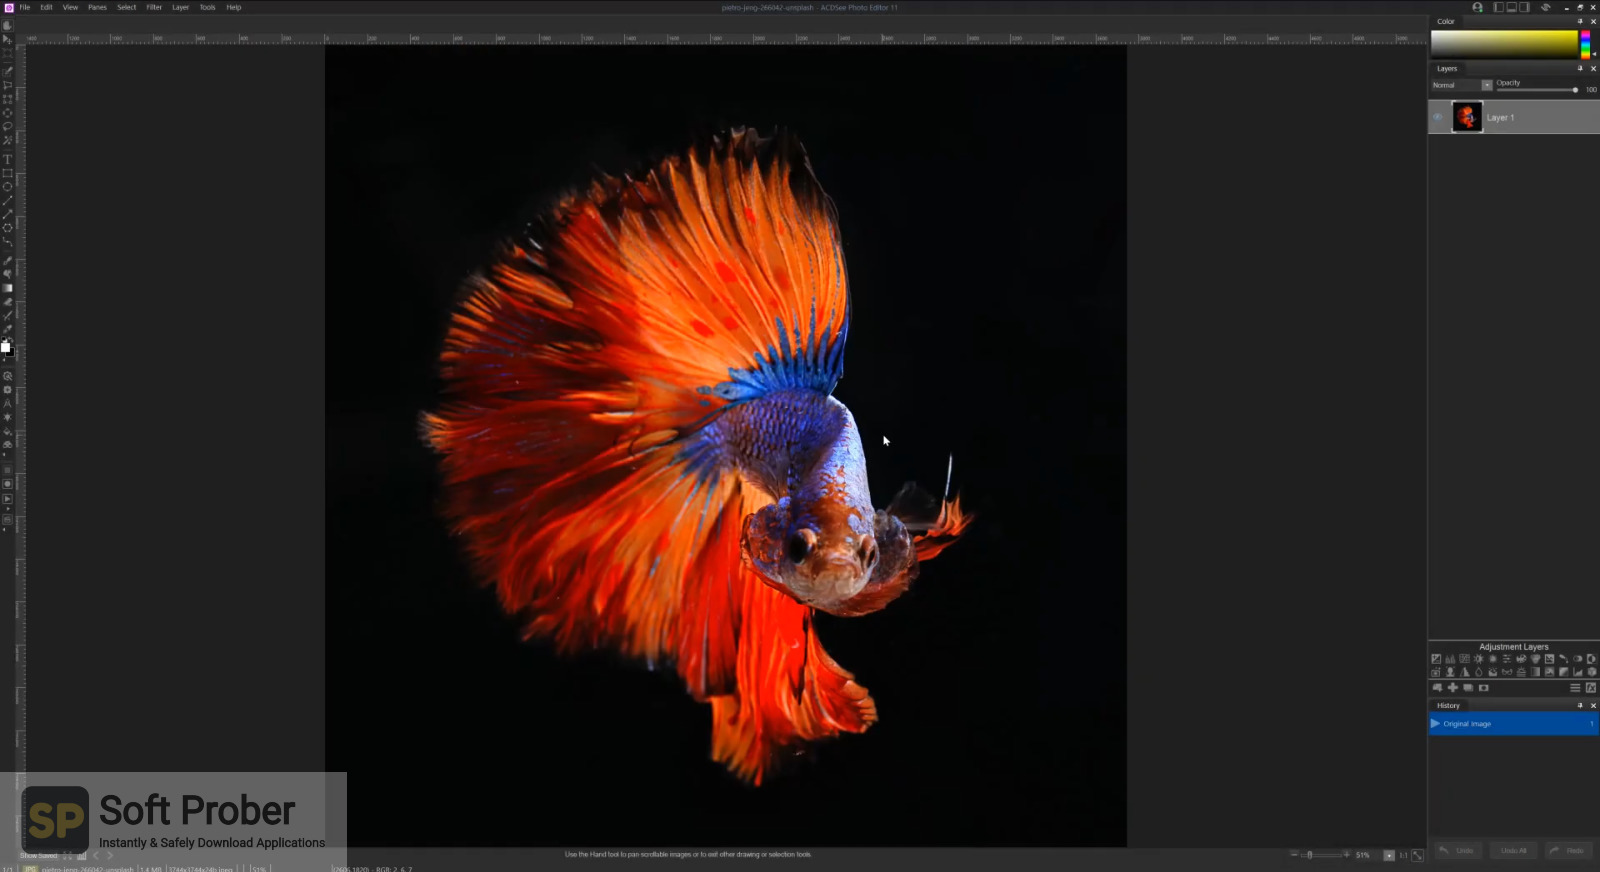 acdsee photo editor 10 free download